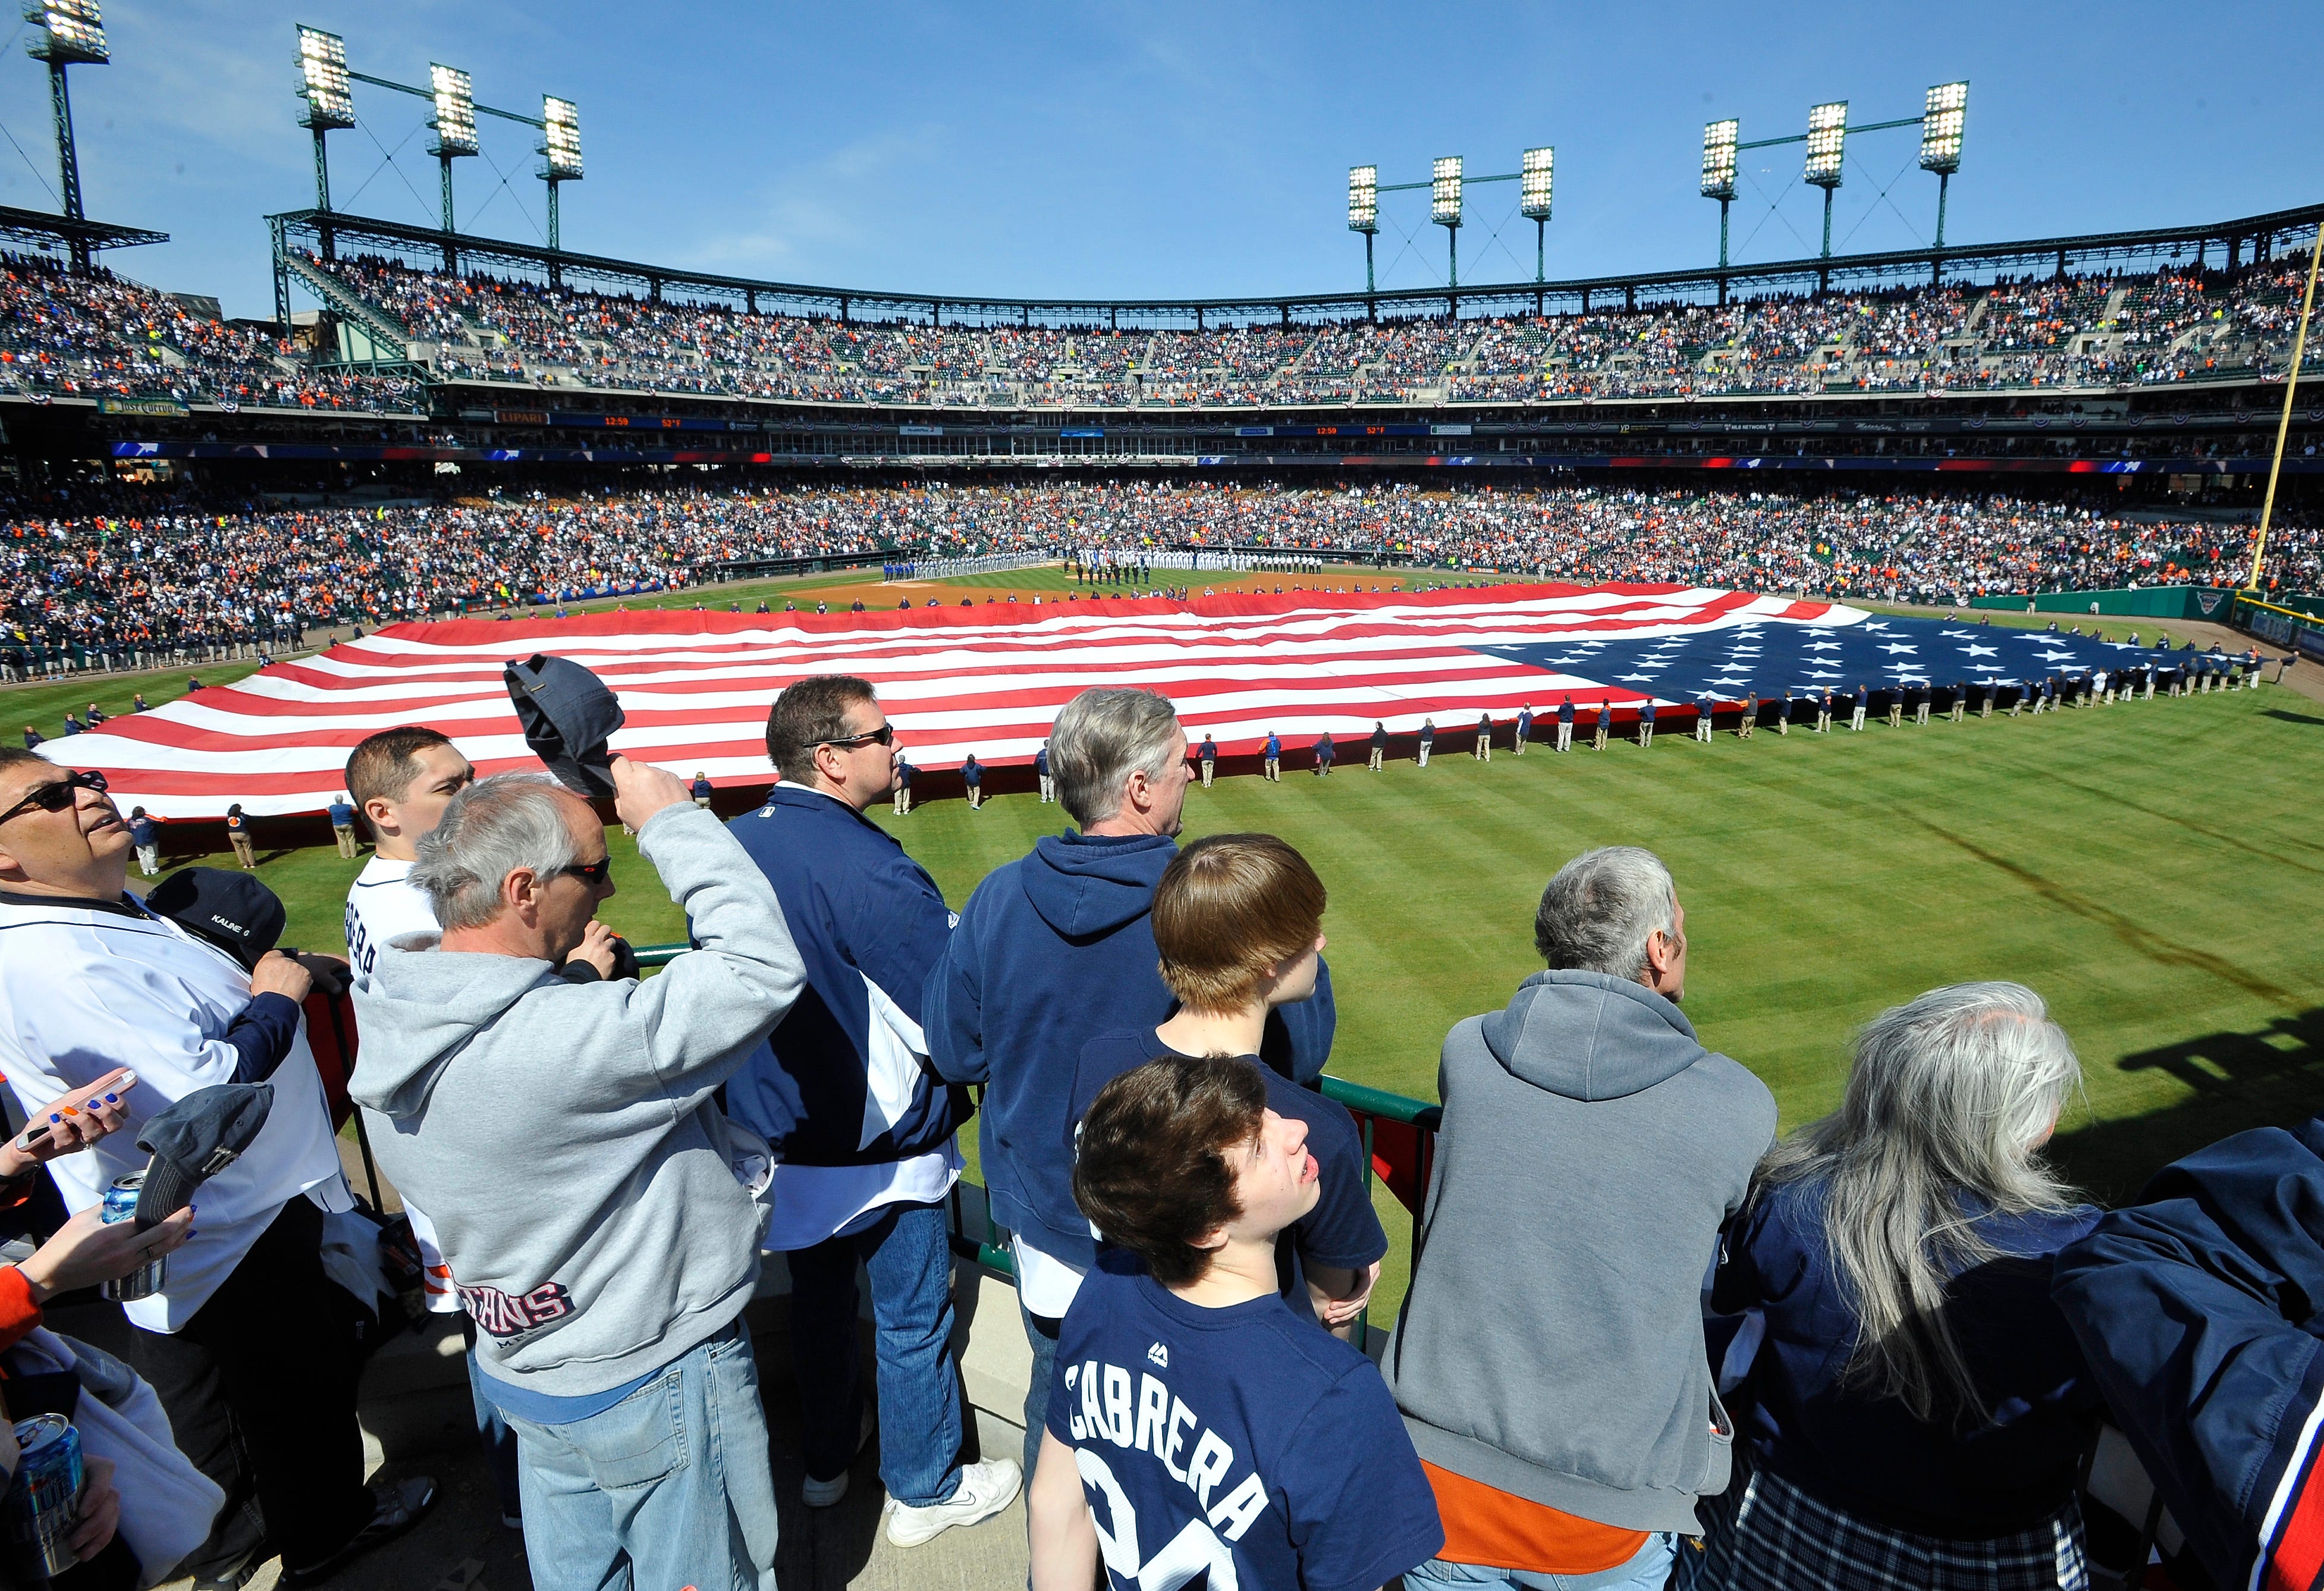 People stand for the National Anthem at the Detroit Tigers Opening Day vs the Kansas City Royal at Comerica Park in Detroit, Michigan on March 31, 2014.